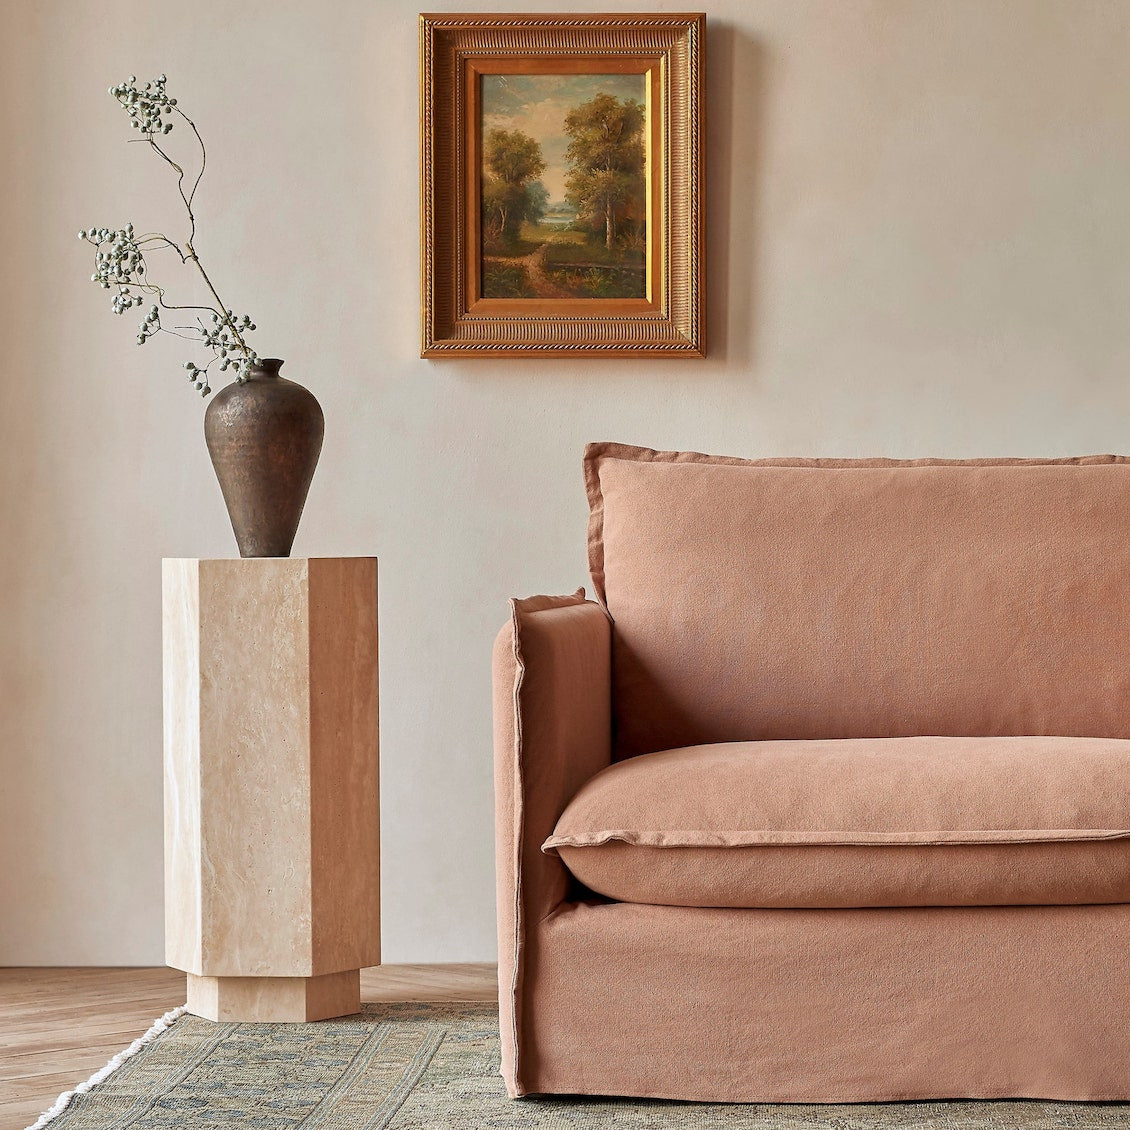 Neva Chair in Nectarine Dream, Thread-Dyed Cotton Linen, placed in a sunlit room beside a decorative pillar and vase